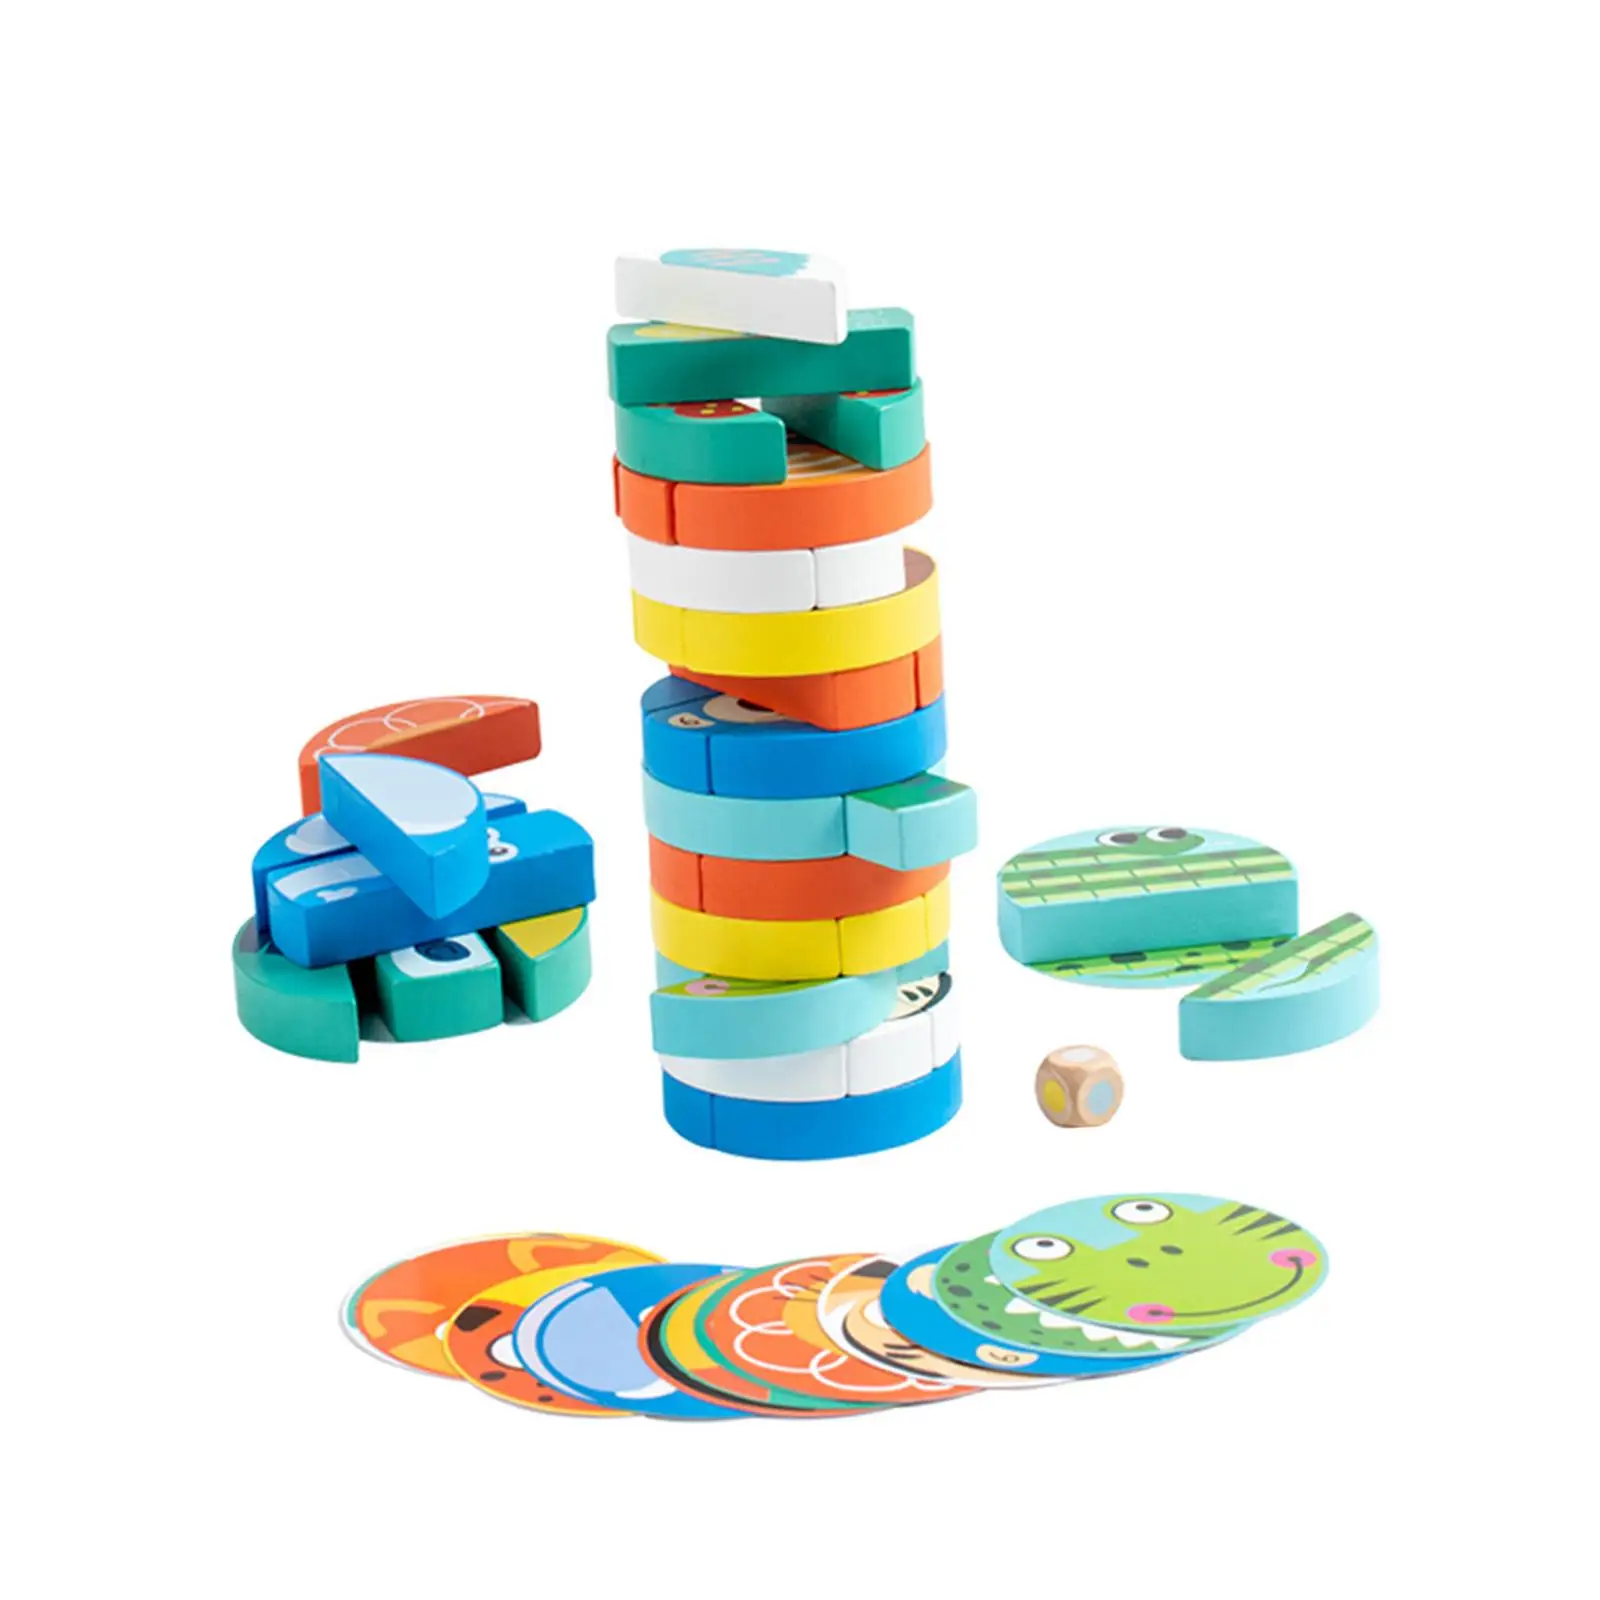 Wooden Blocks Stacking Game Tumble Towers Game for Festival Children